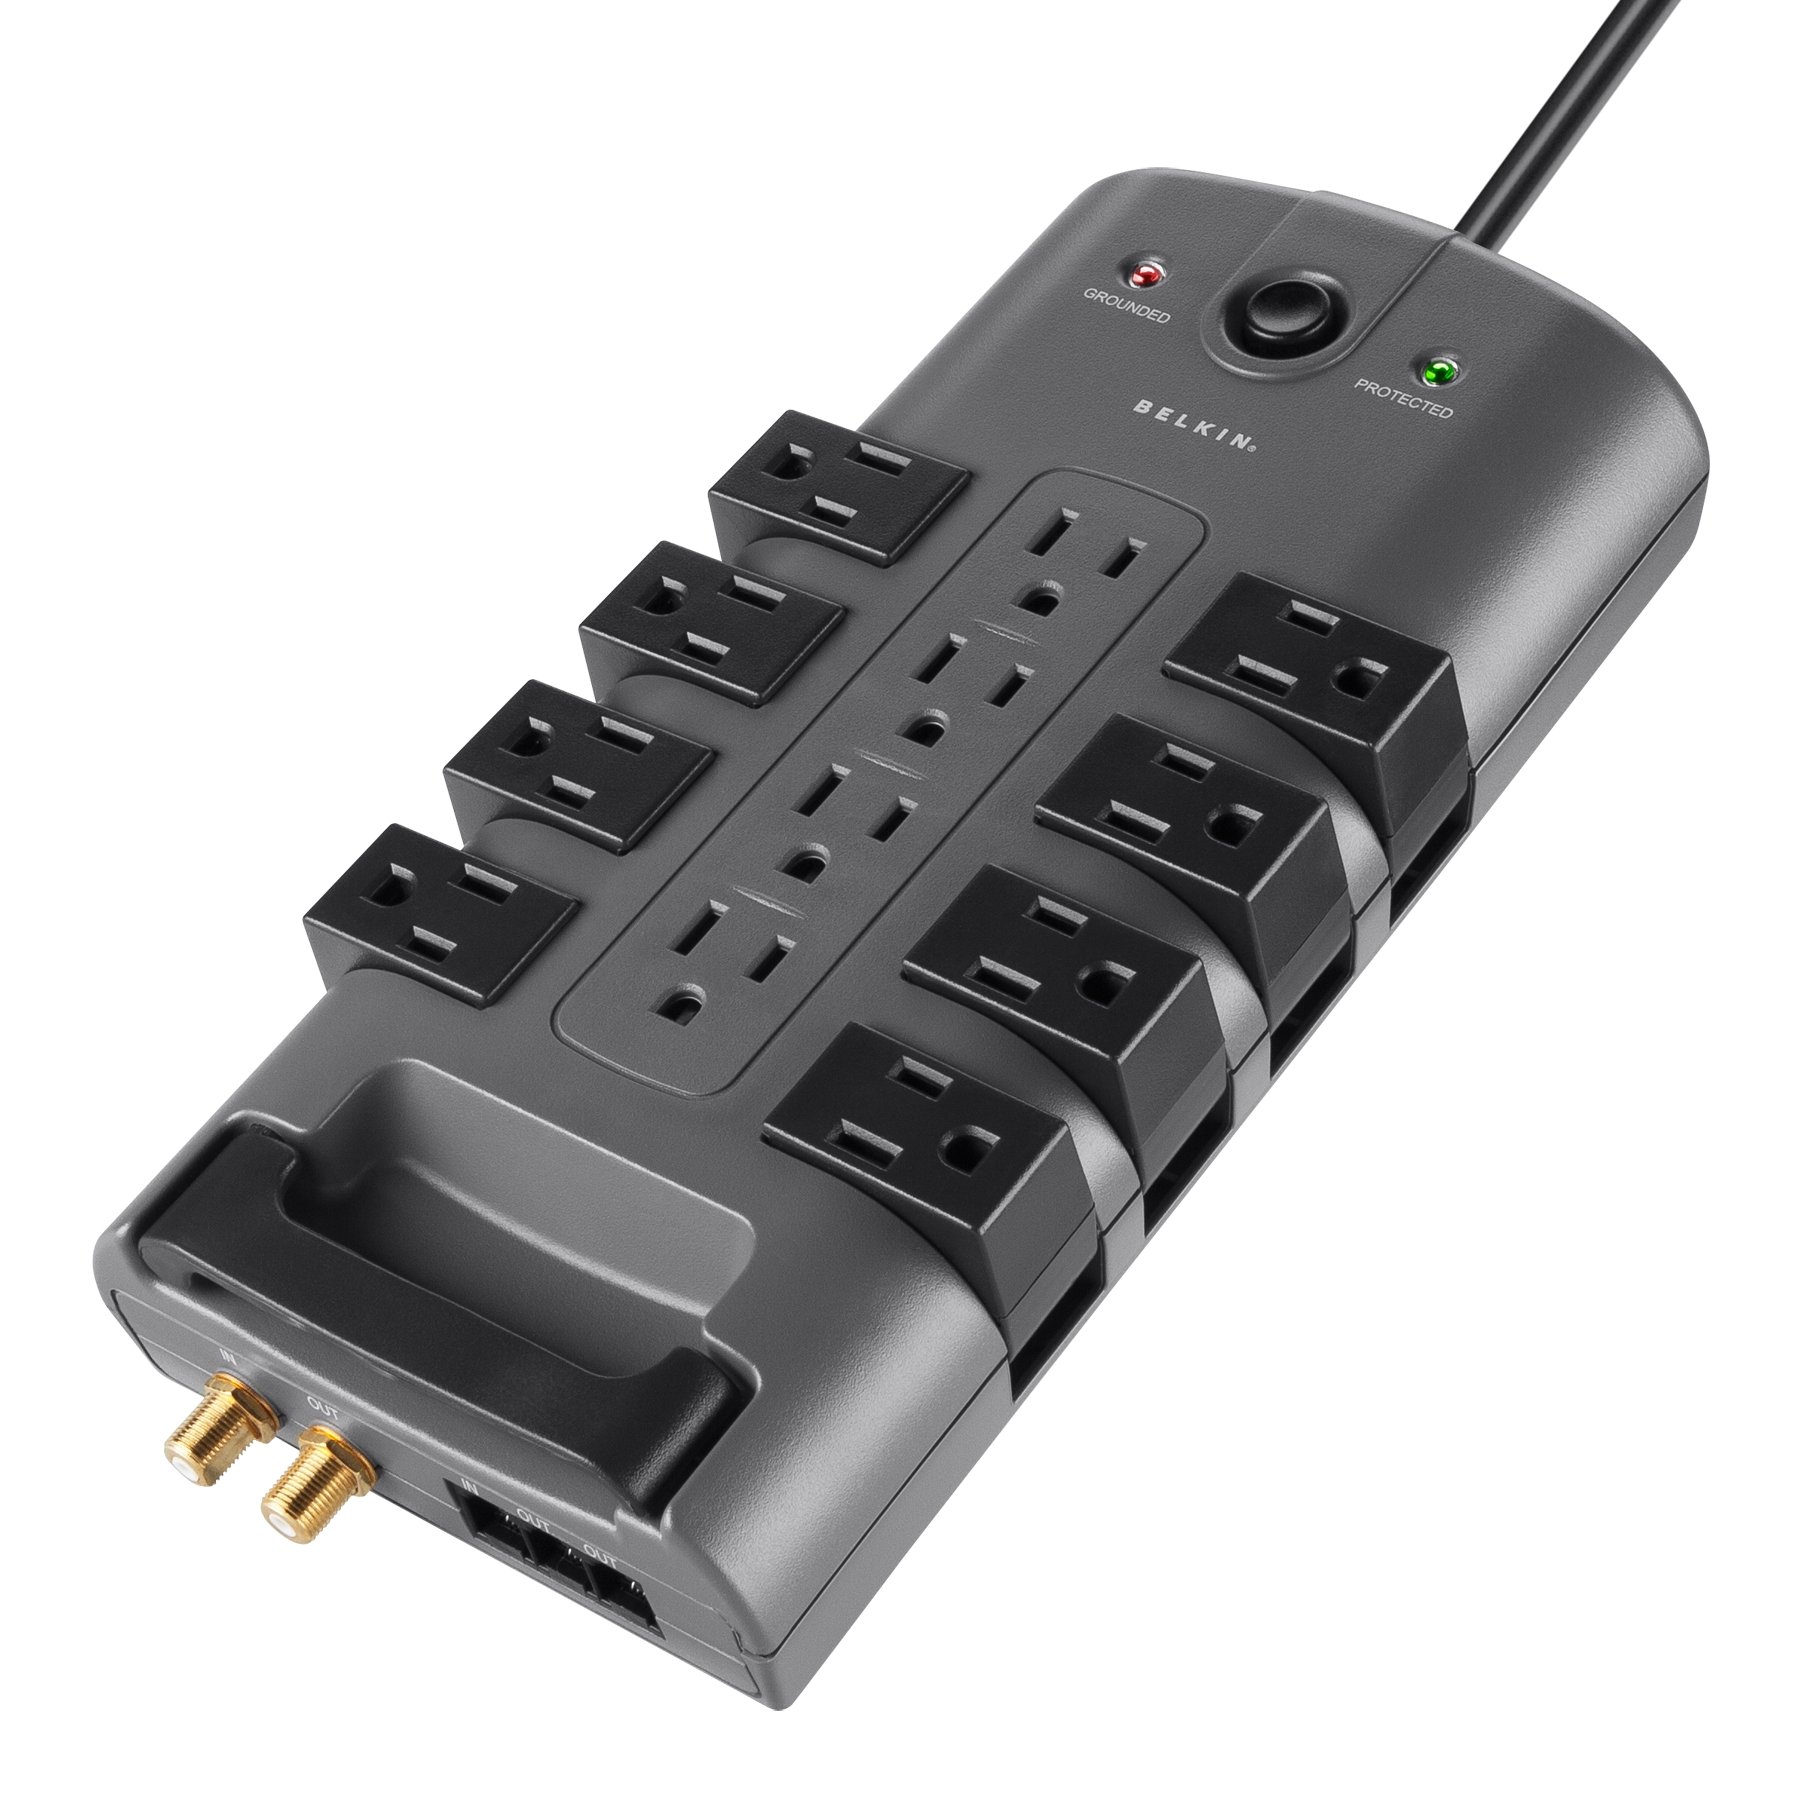 Belkin Surge Protector Power Strip w/ 8 Rotating & 4 Standard Outlets - 8ft Sturdy Extension Cord w/ Flat Pivot Plug for Home, Office, Travel, Desktop & Charging Brick - 4320 Joules of Protection